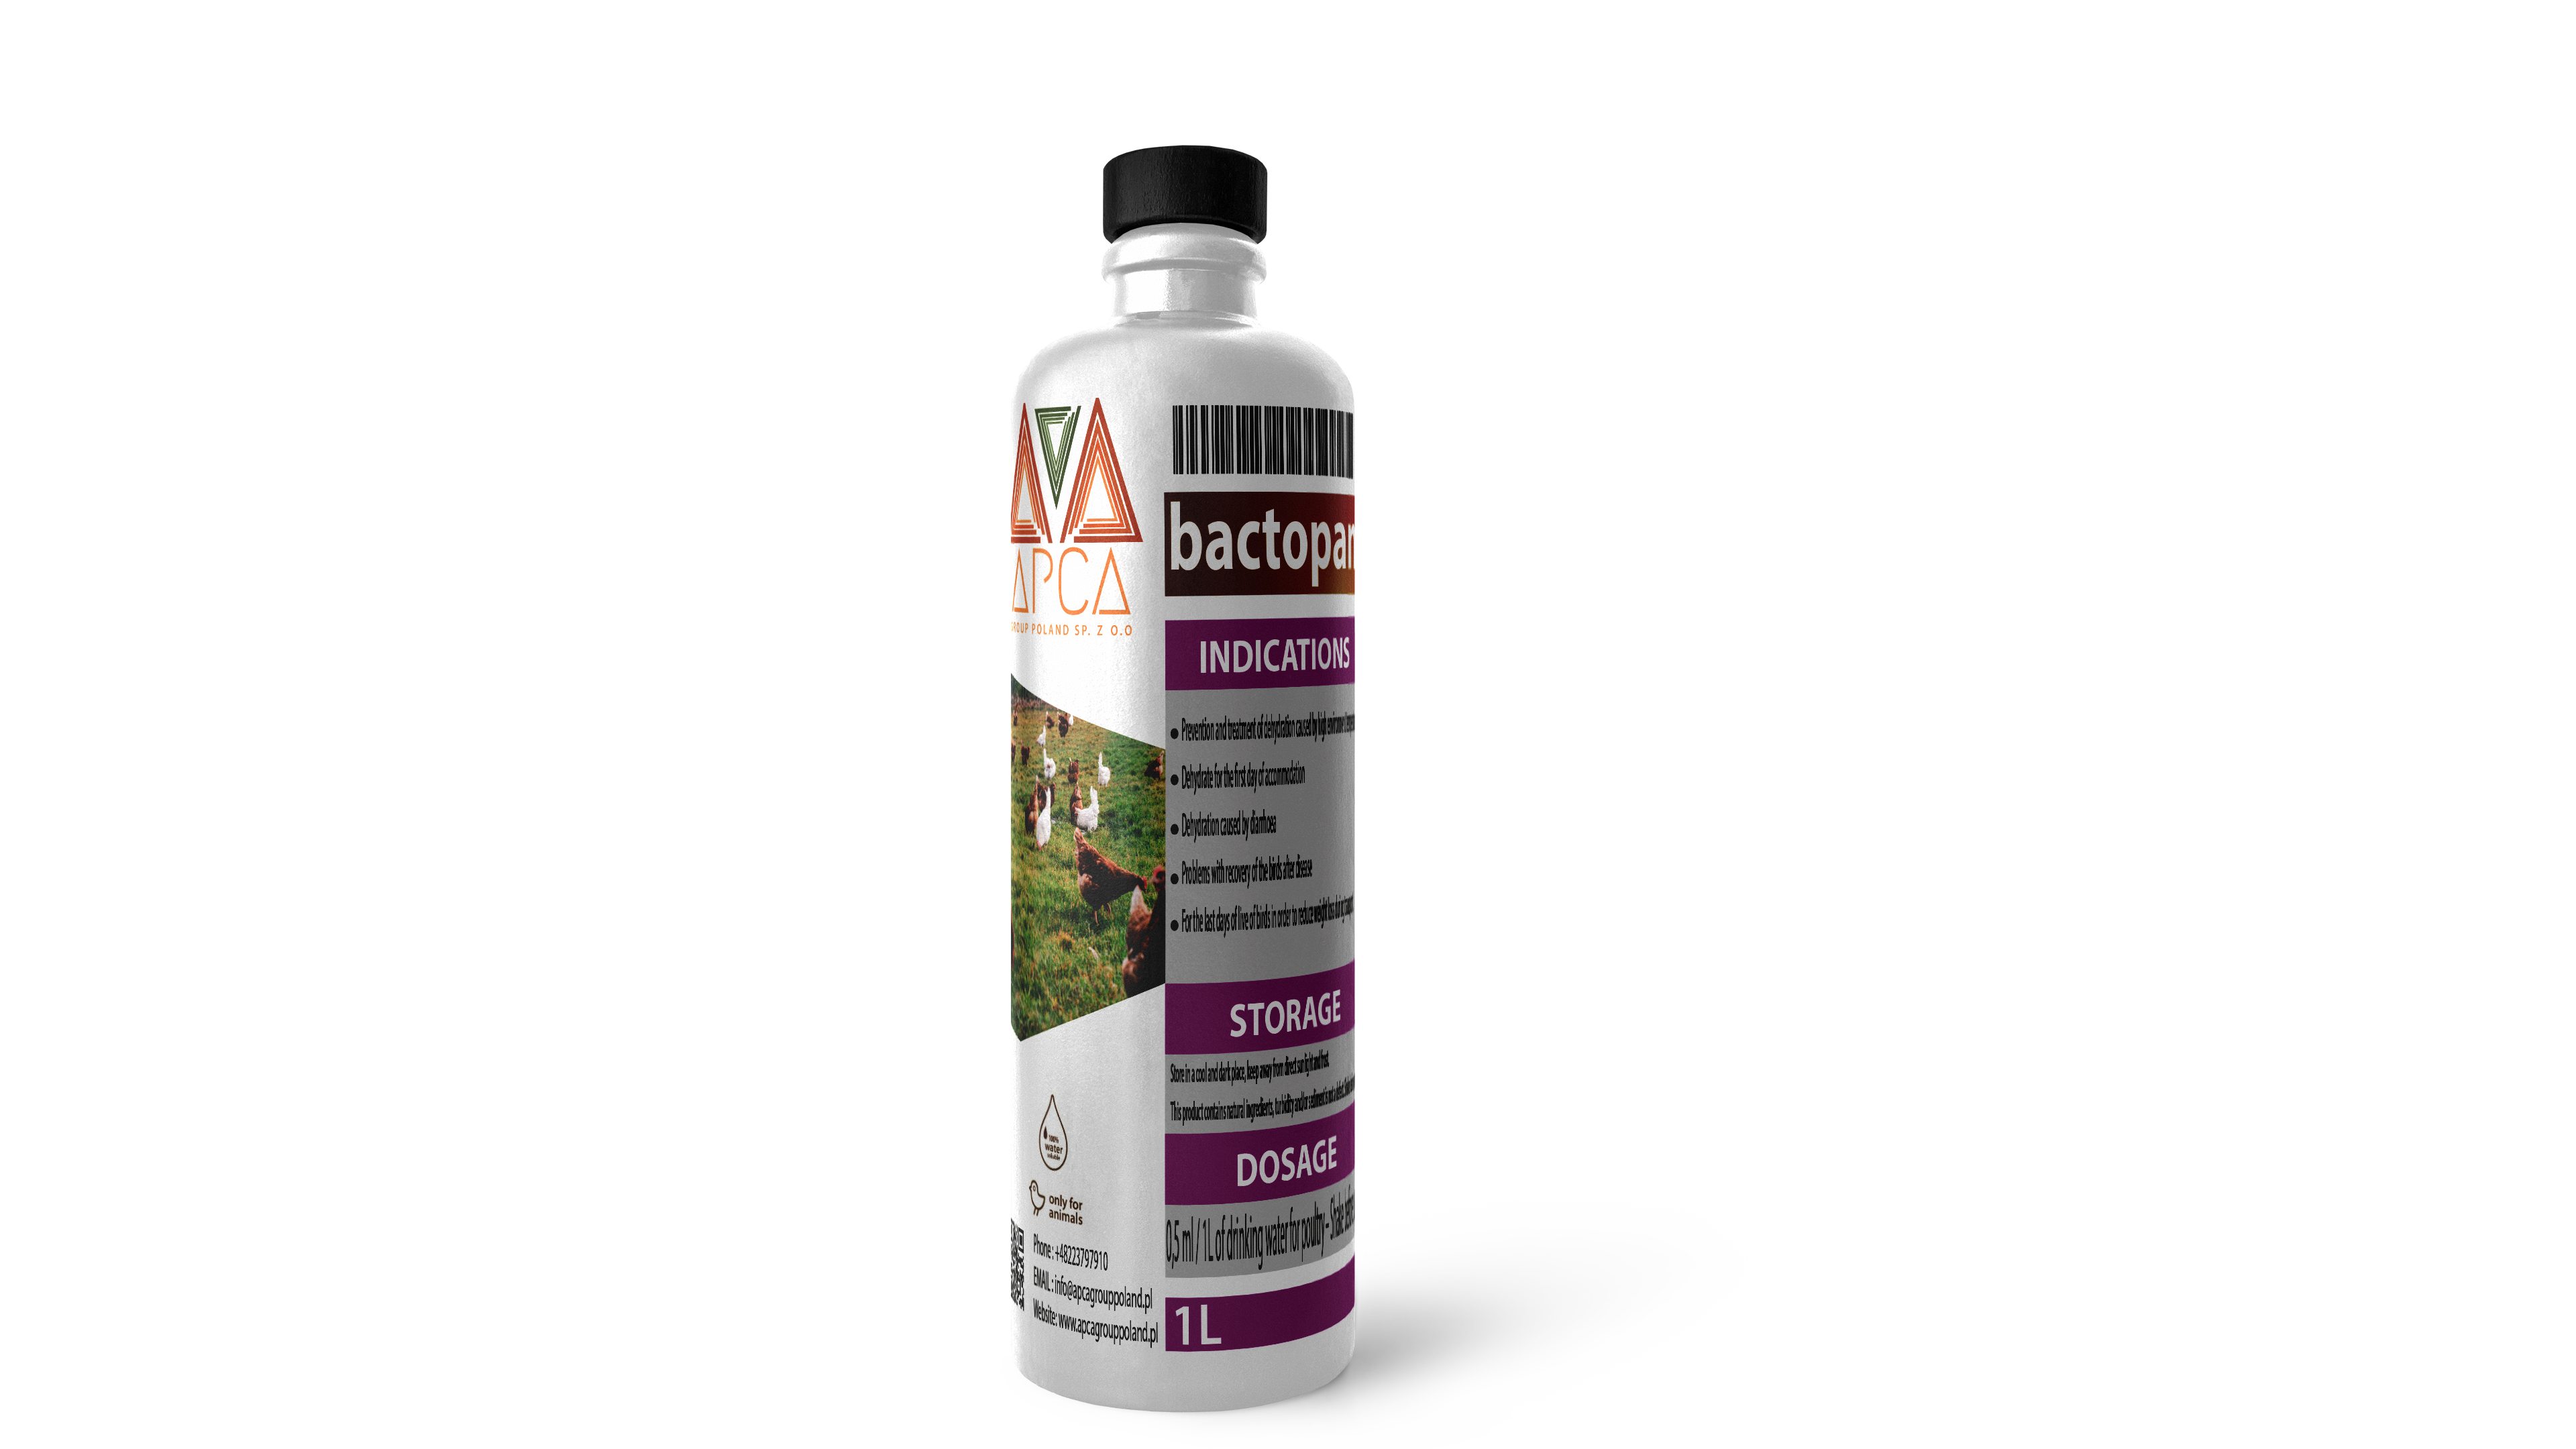 apca group poland -- export veterinary products -- bactopan